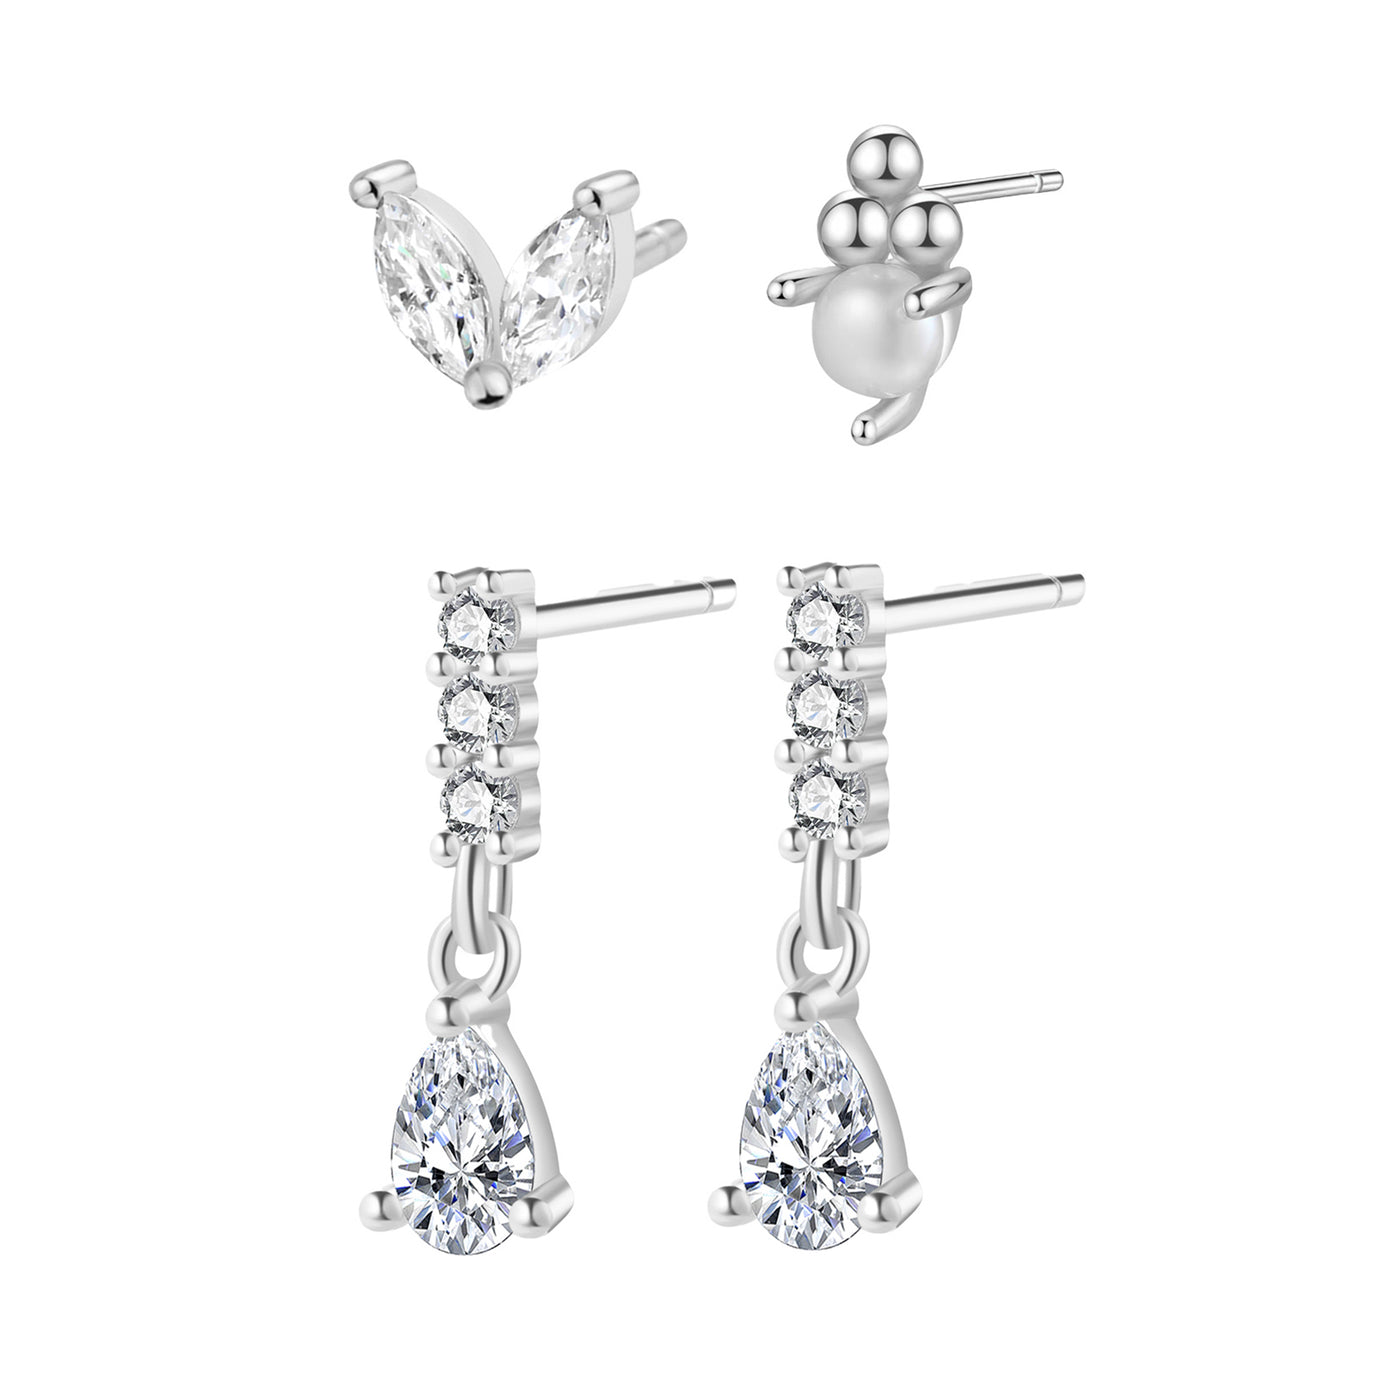 Gemstone and Pearl Earring Set Sterling Silver